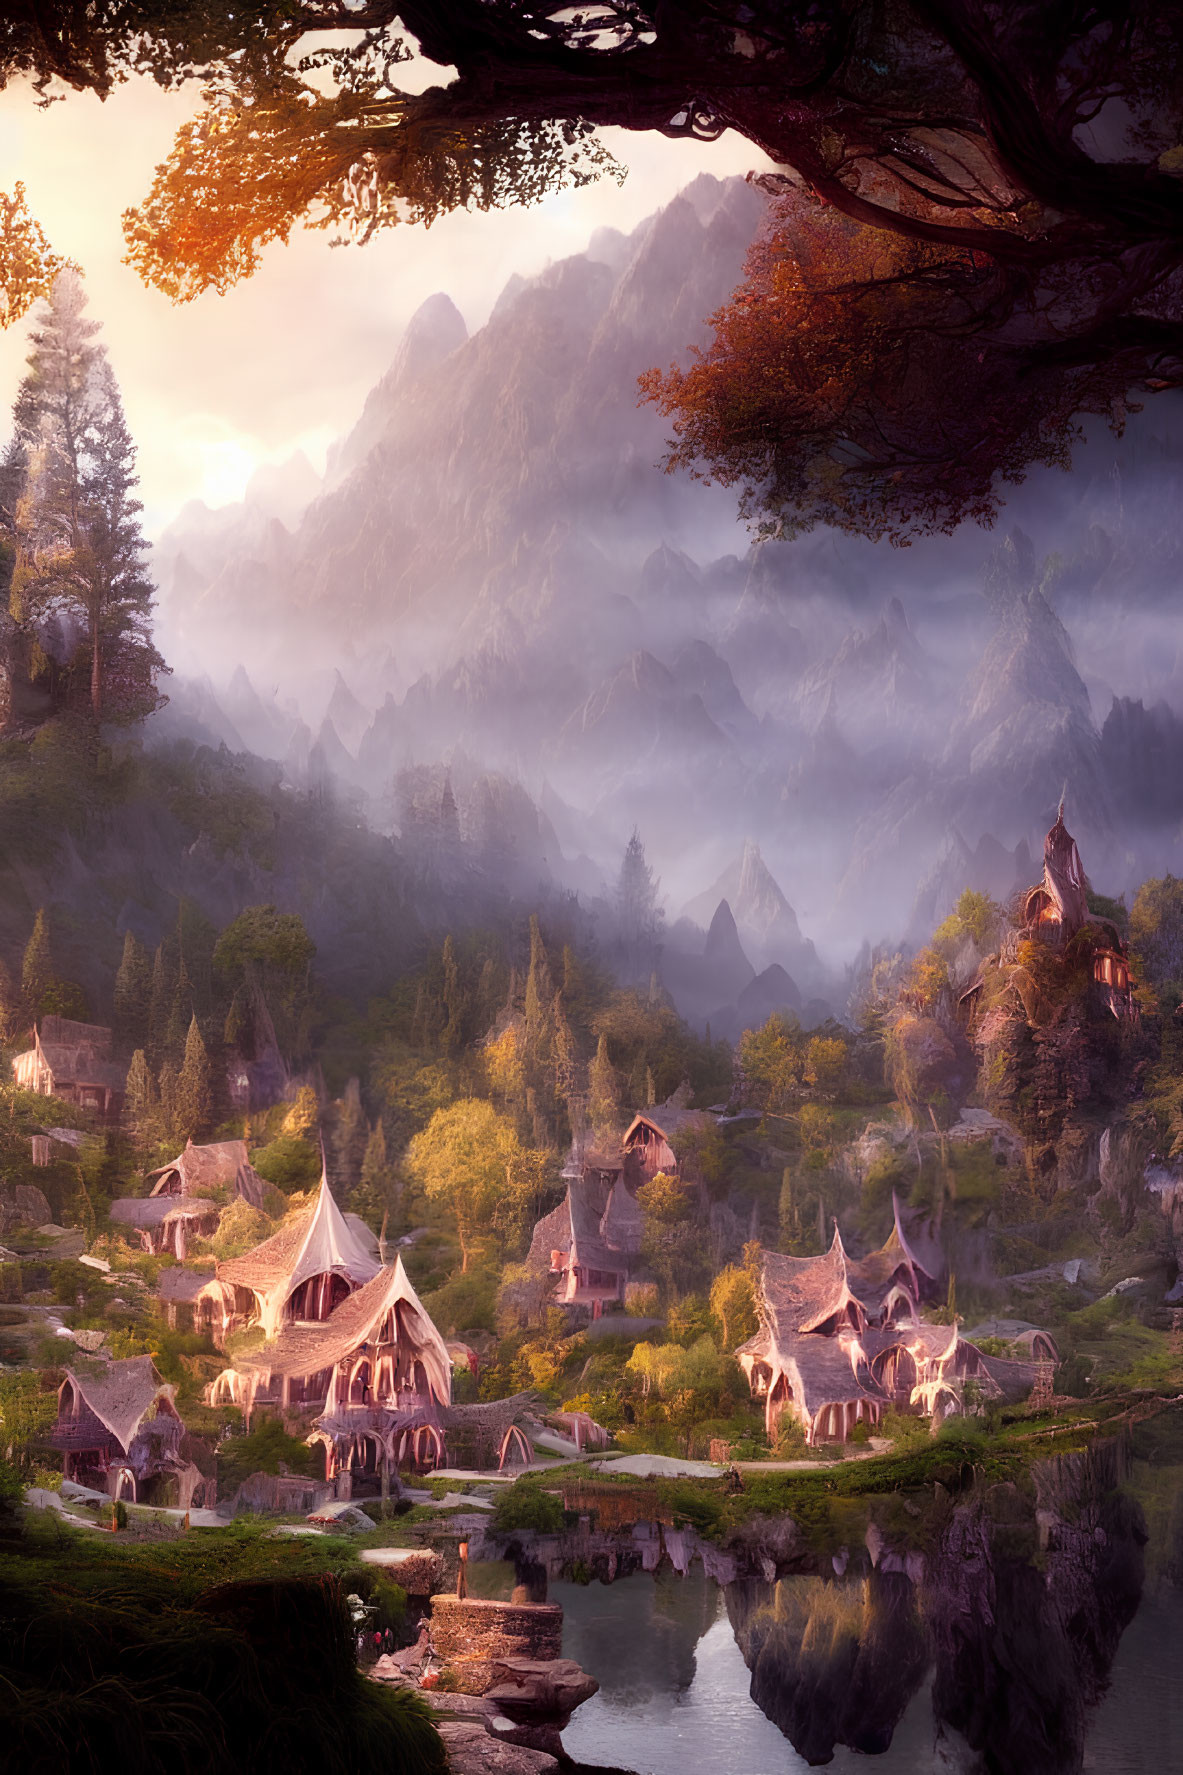 Tranquil fantasy village by river in misty mountains at sunrise